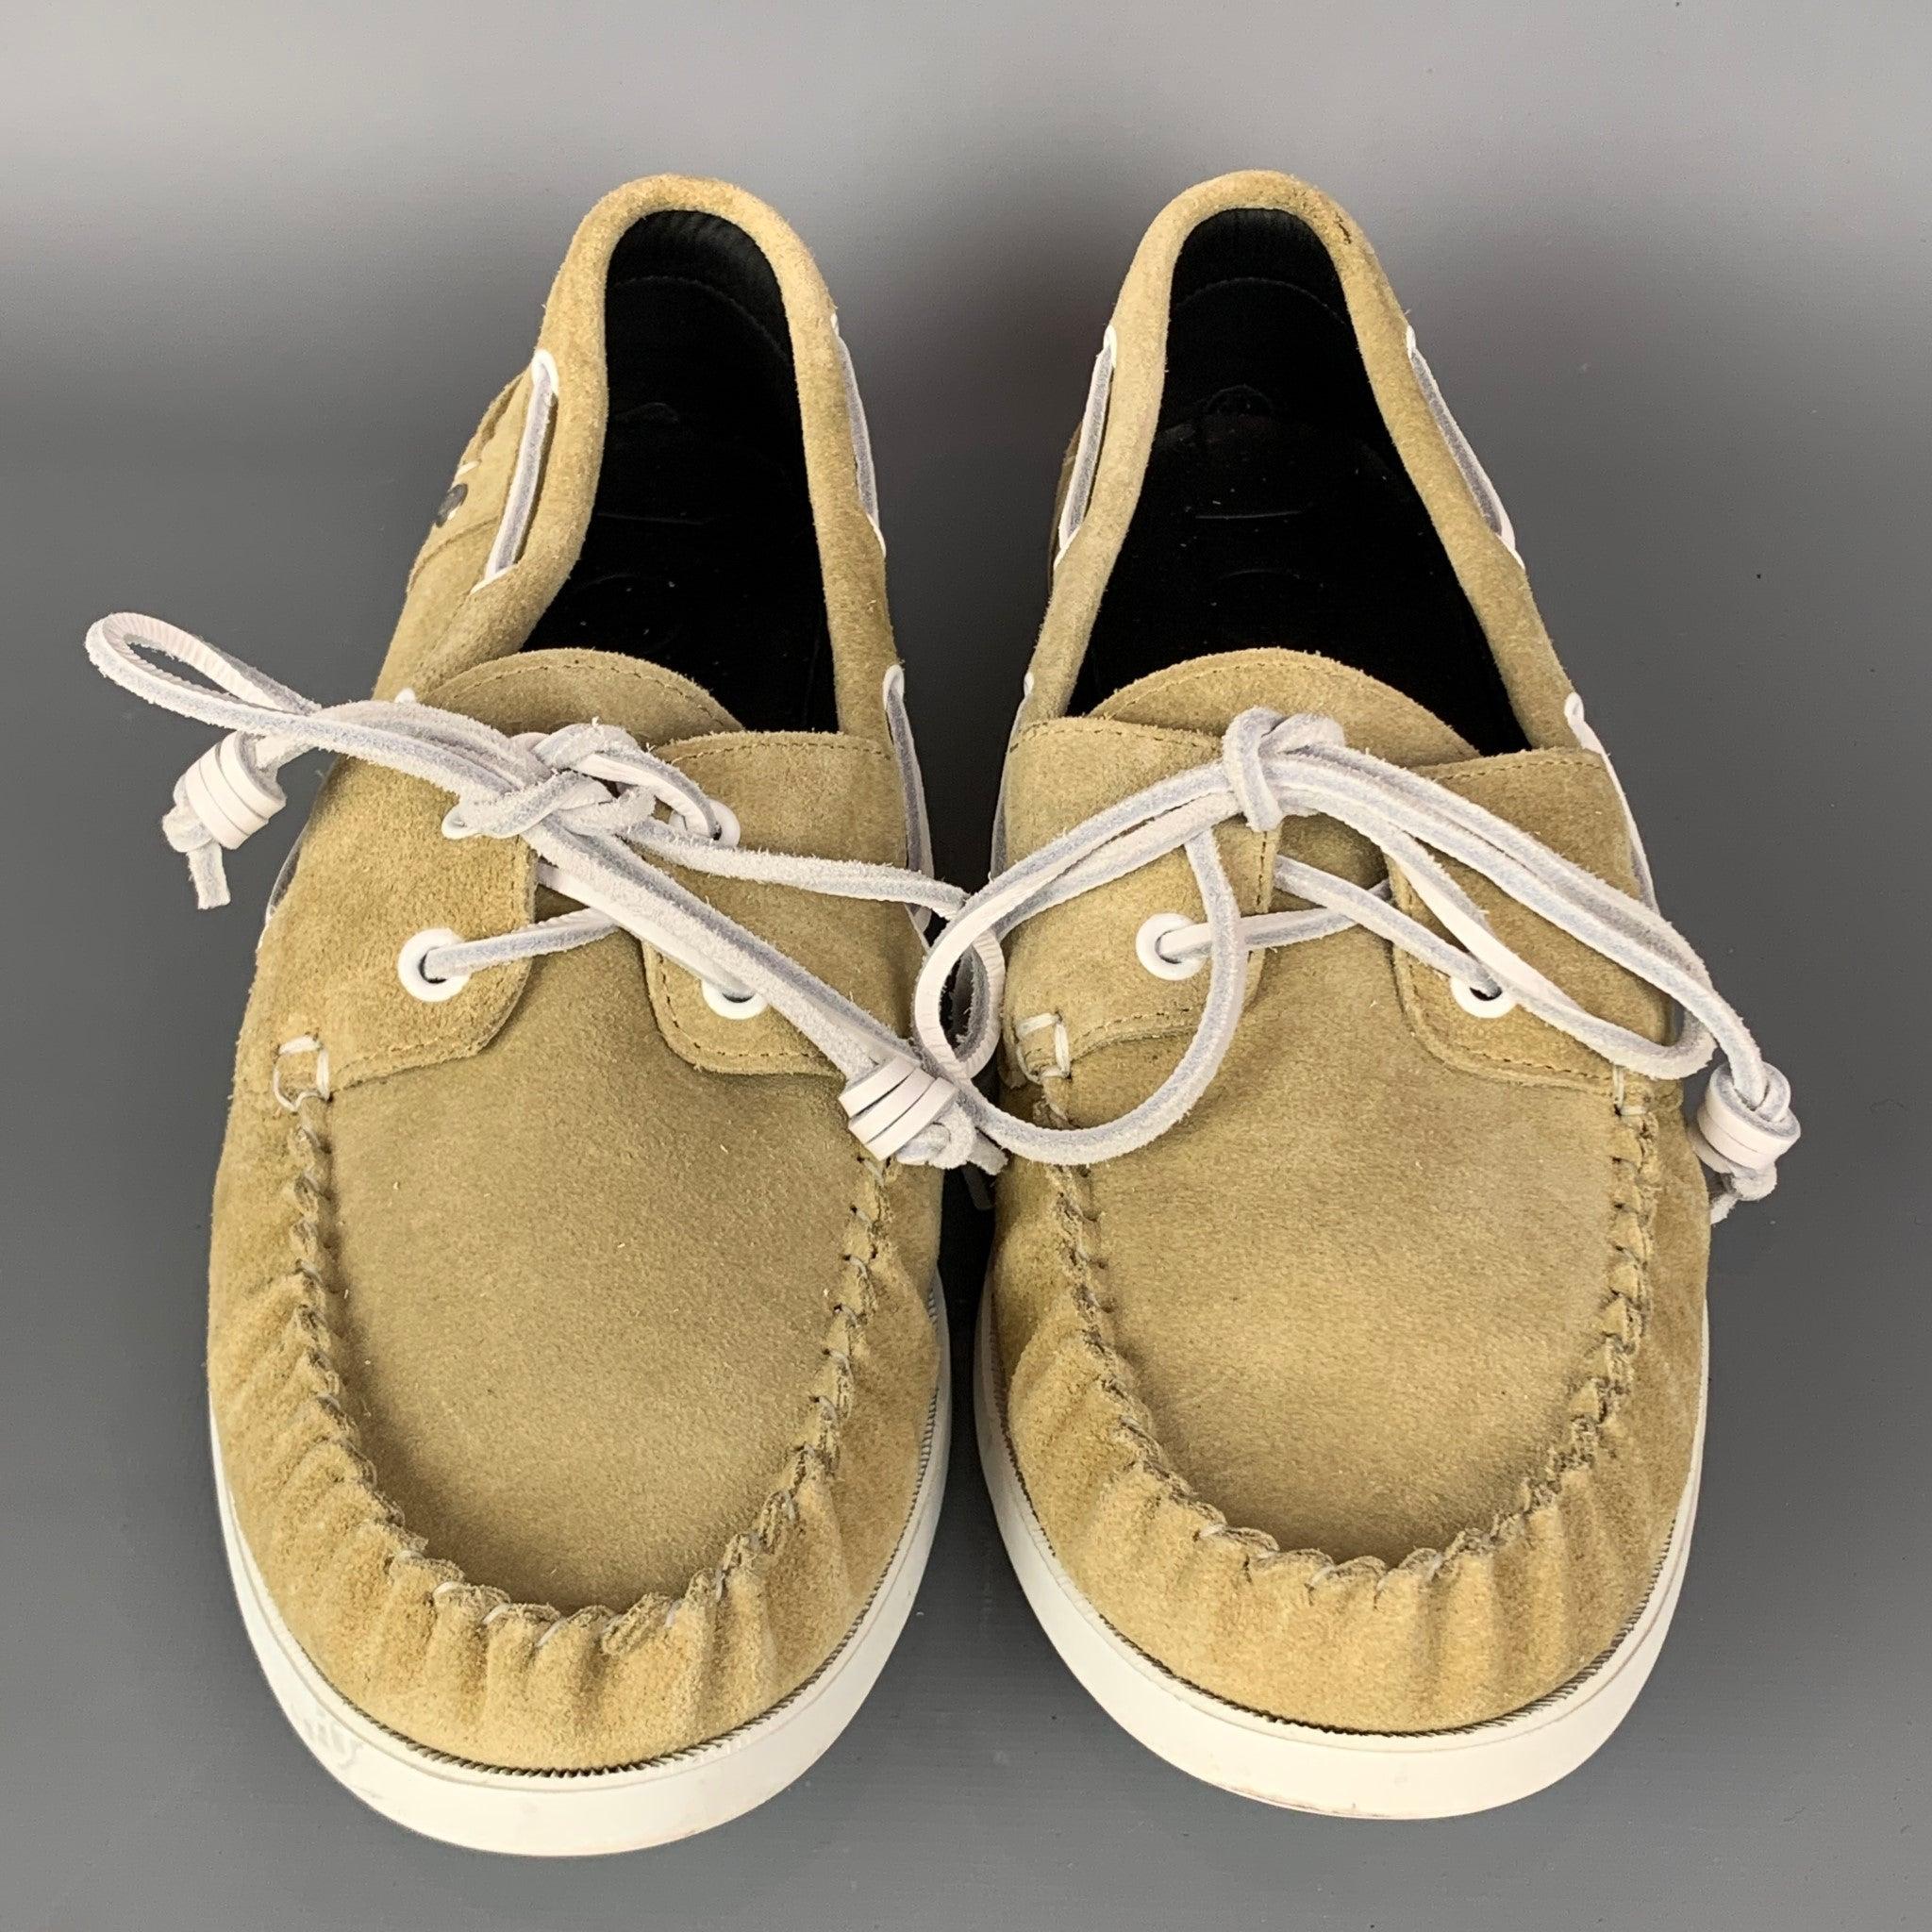 Men's LOEWE Size 11 Natural Leather Boat Shoe Loafers For Sale